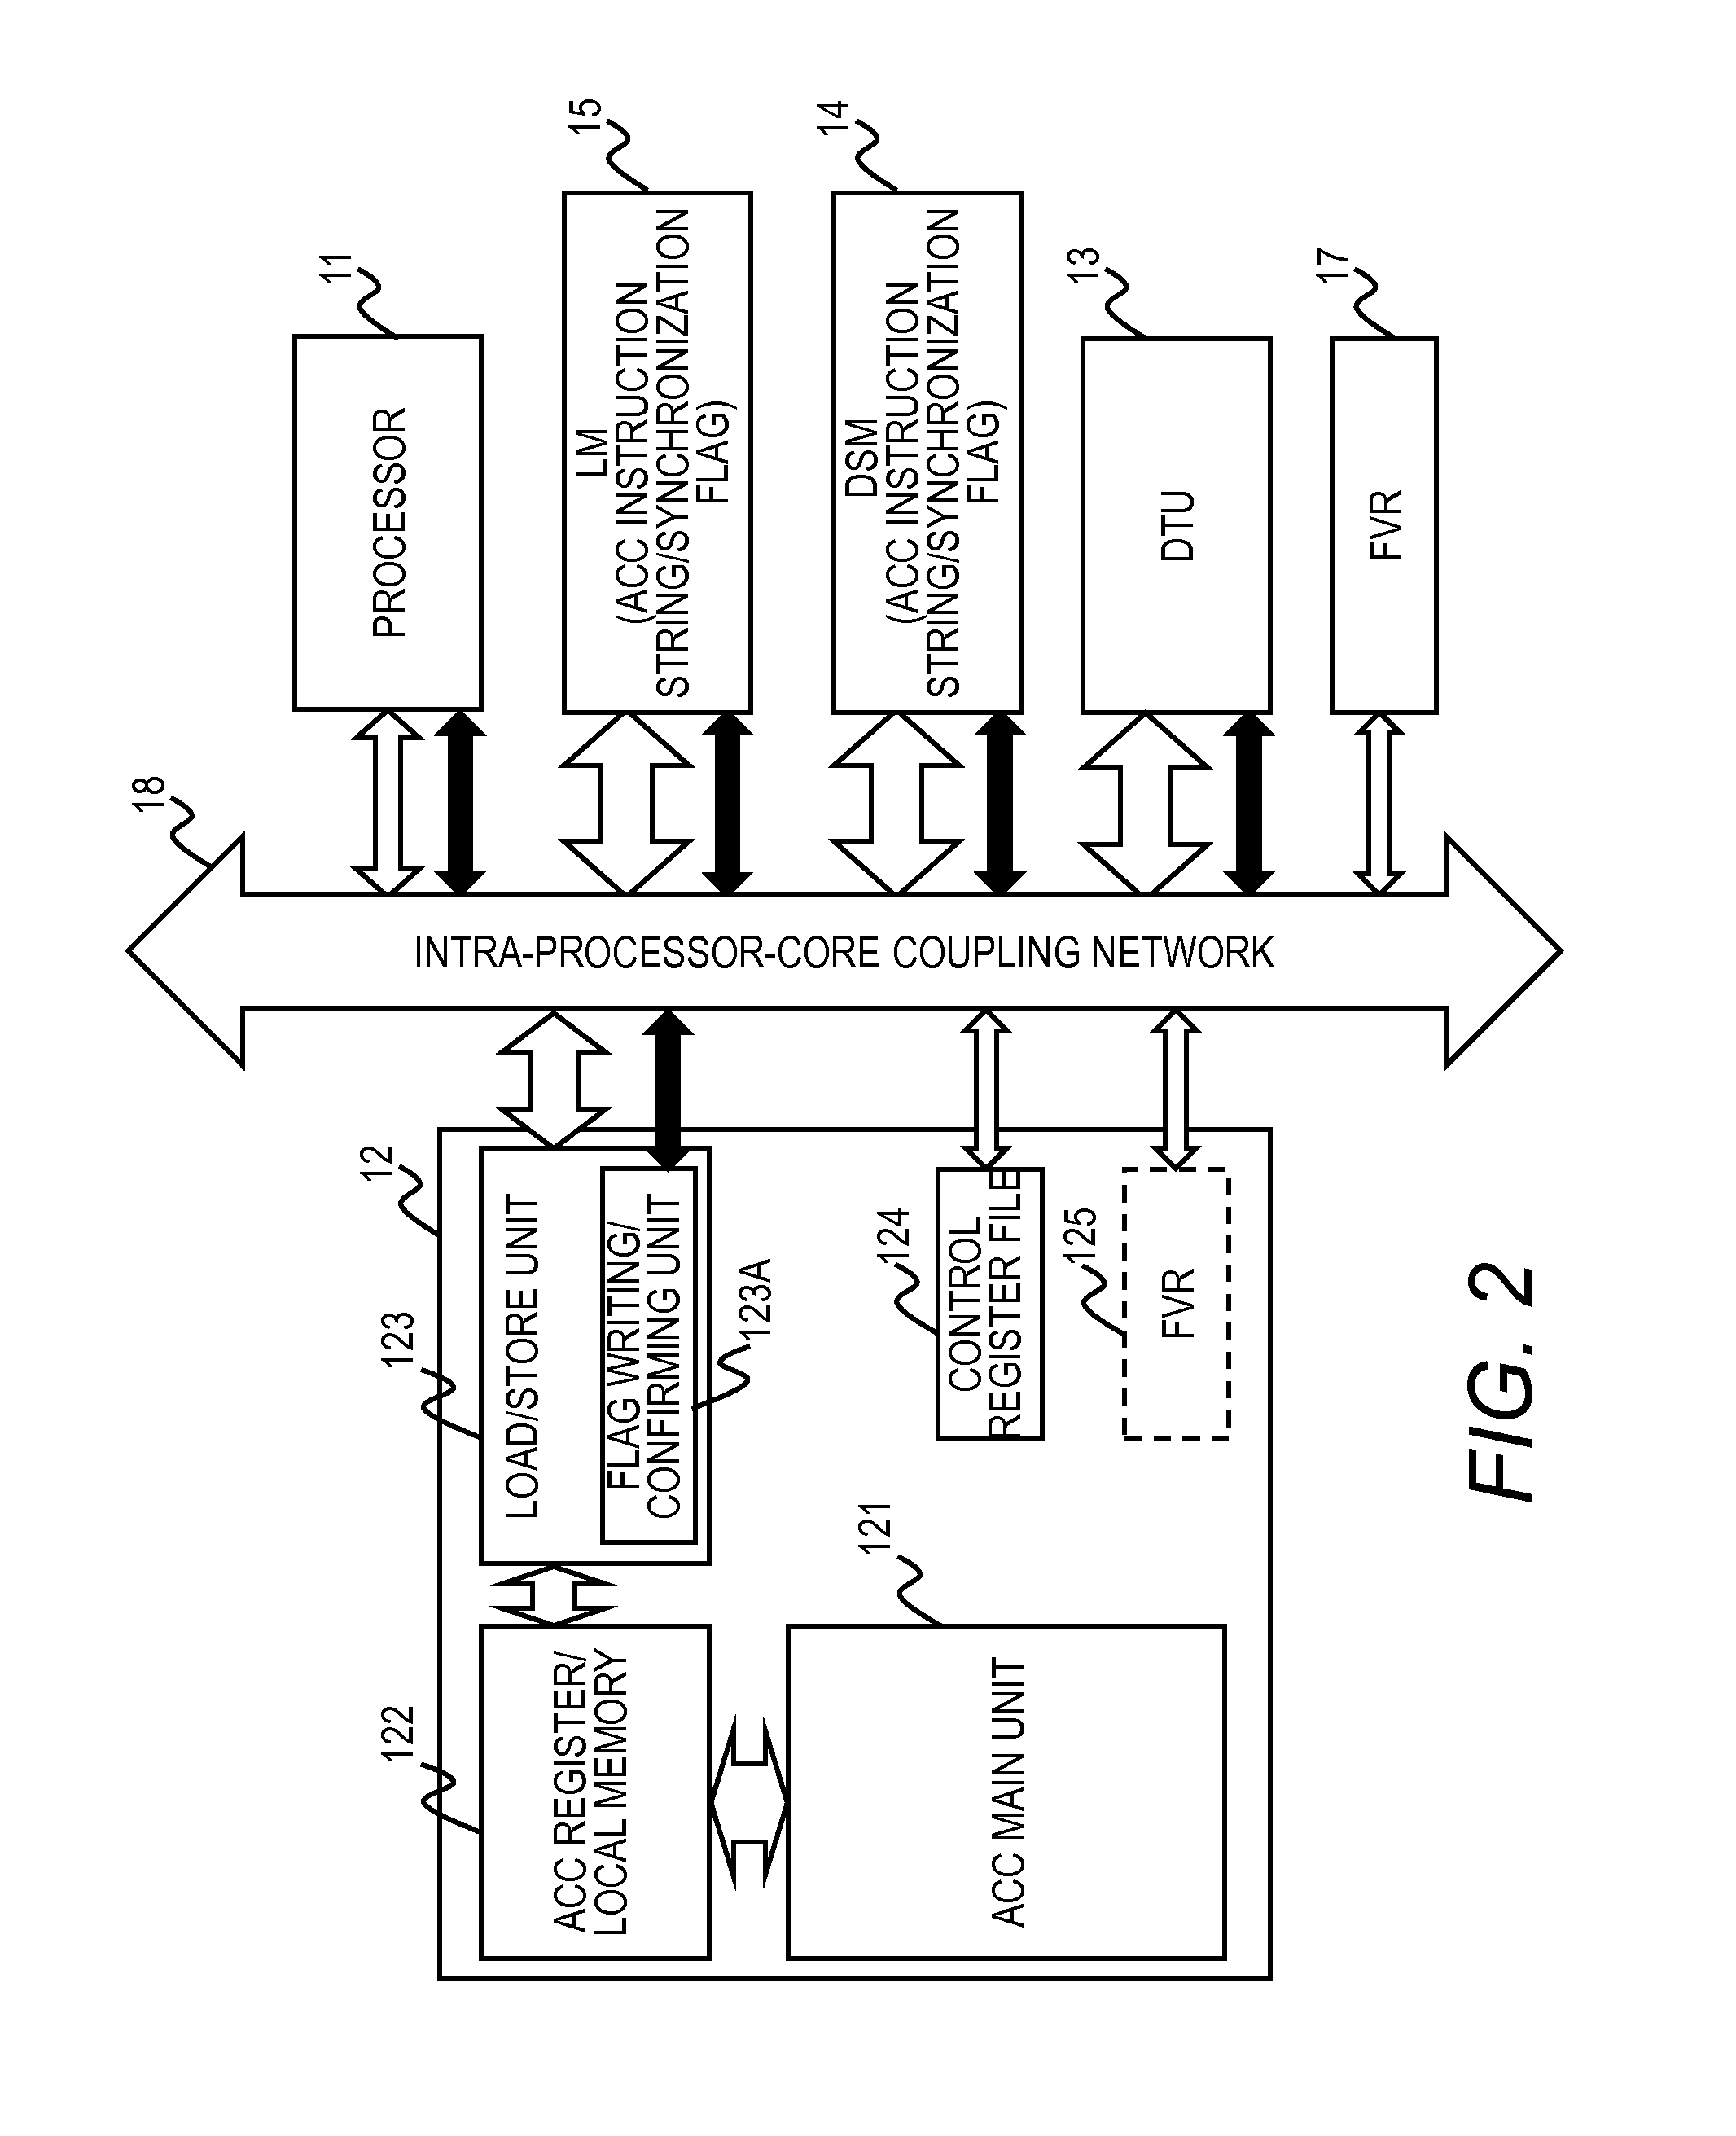 Processor system and accelerator